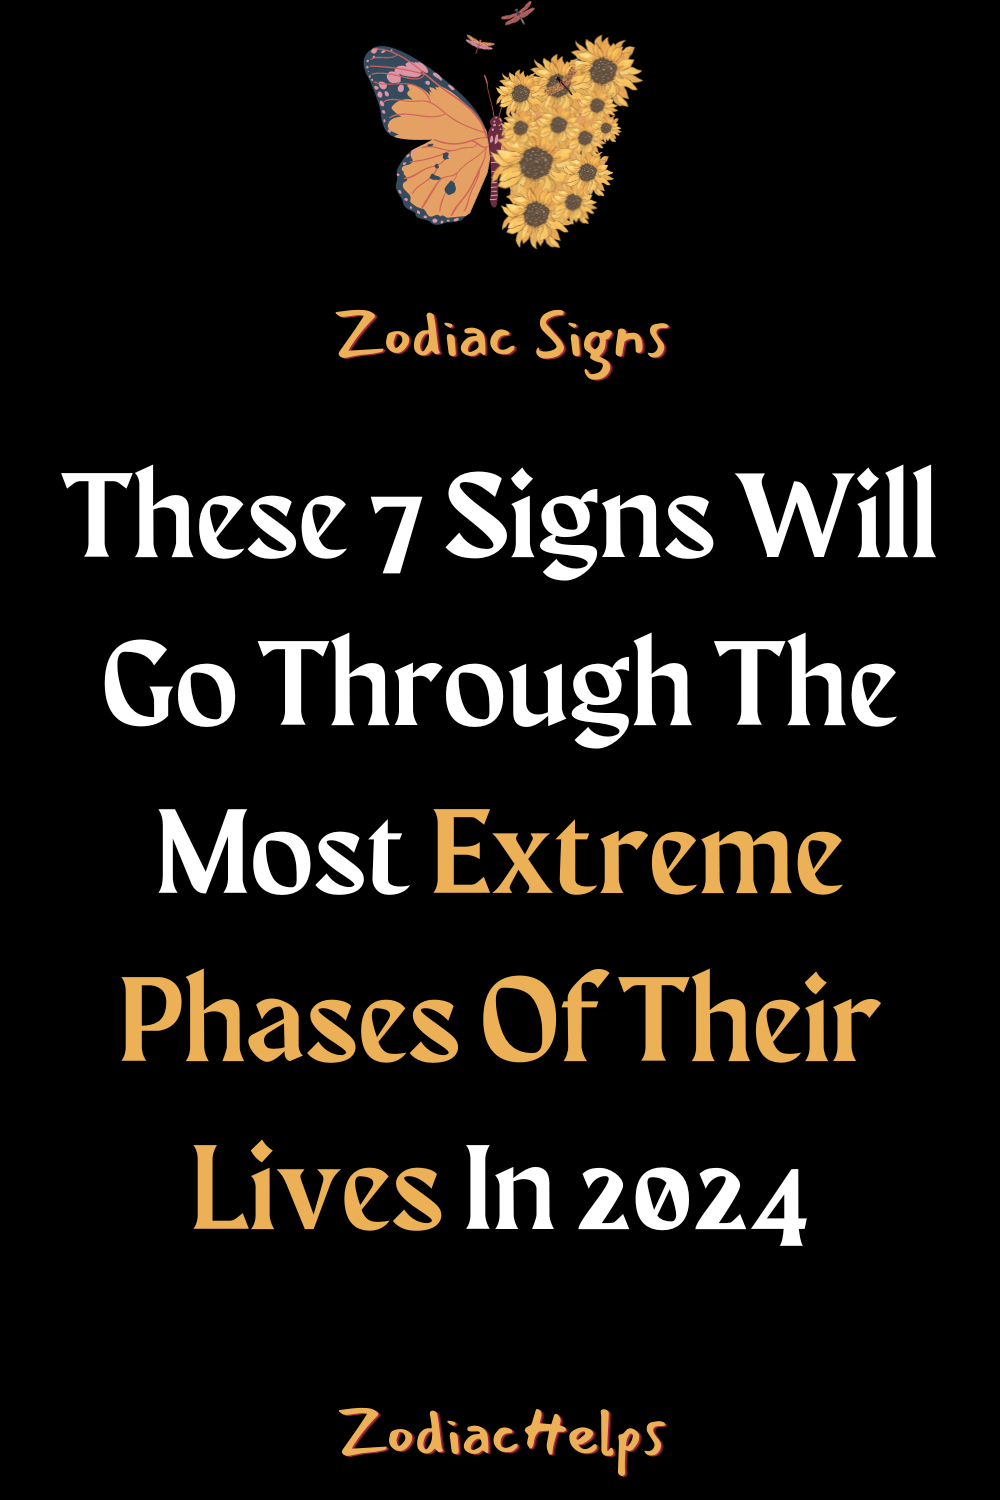 These 7 Signs Will Go Through The Most Extreme Phases Of Their Lives In 2024